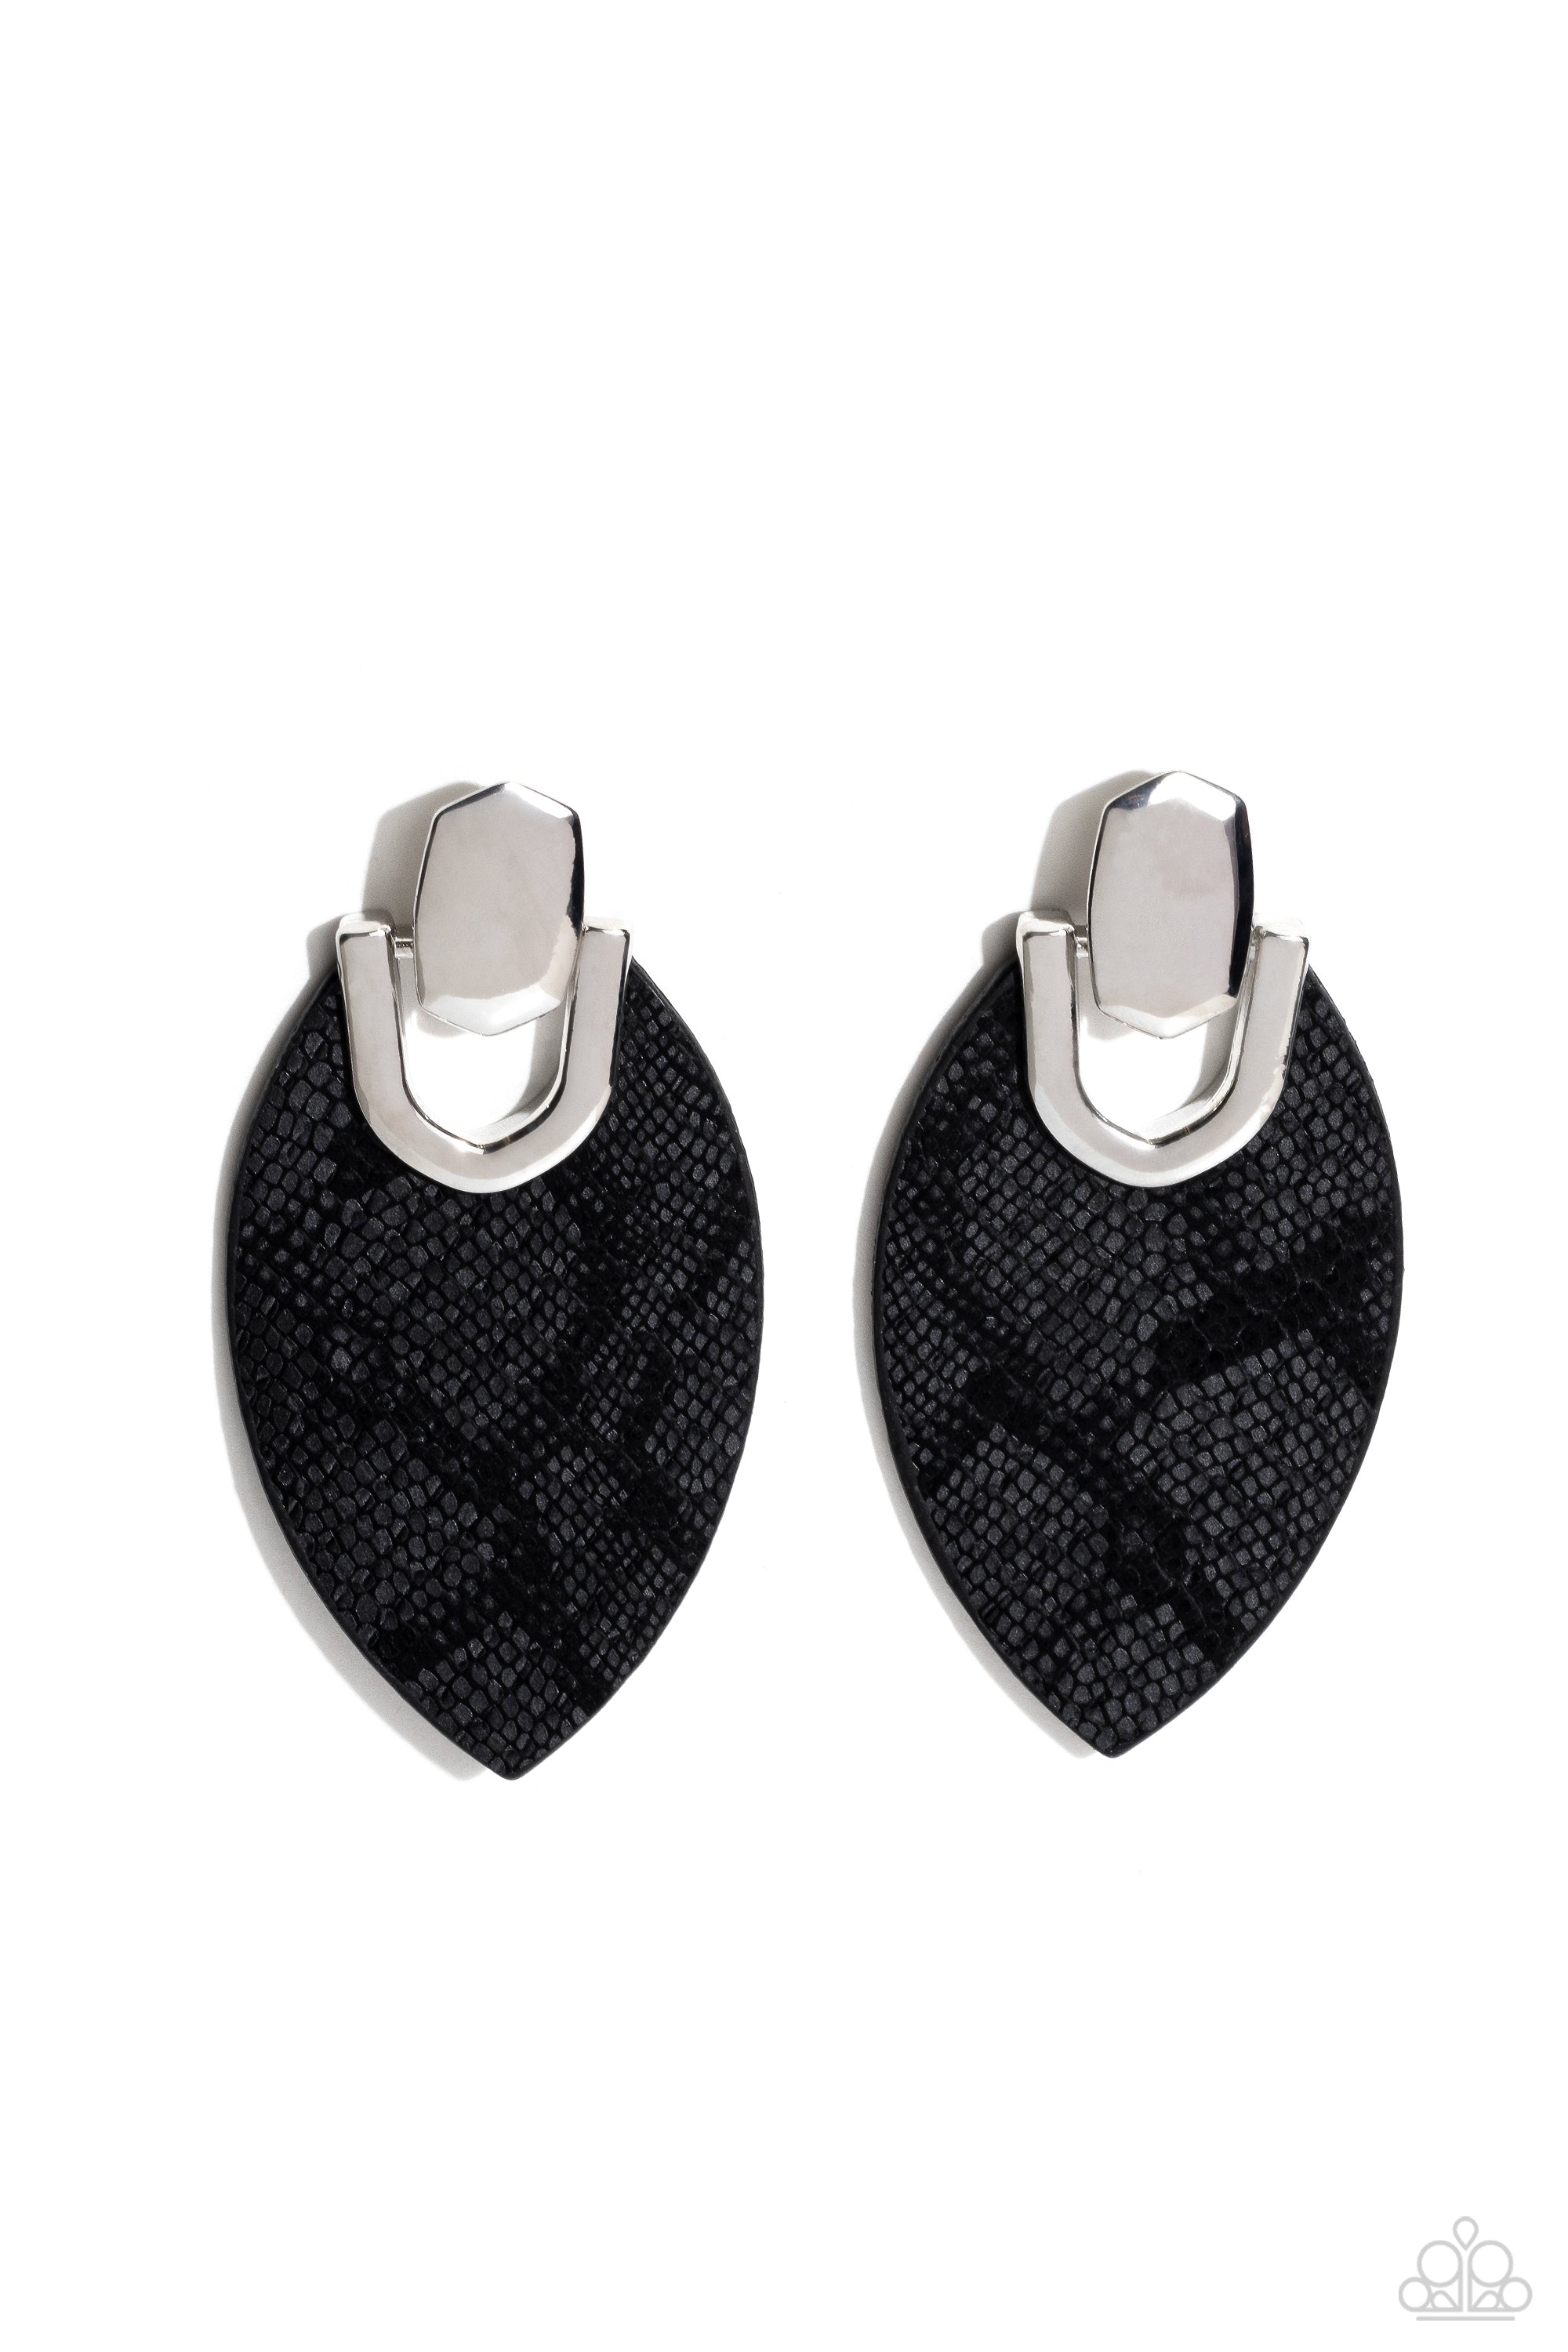 Wildly Workable Black Leather Earrings - Paparazzi Accessories- lightbox - CarasShop.com - $5 Jewelry by Cara Jewels